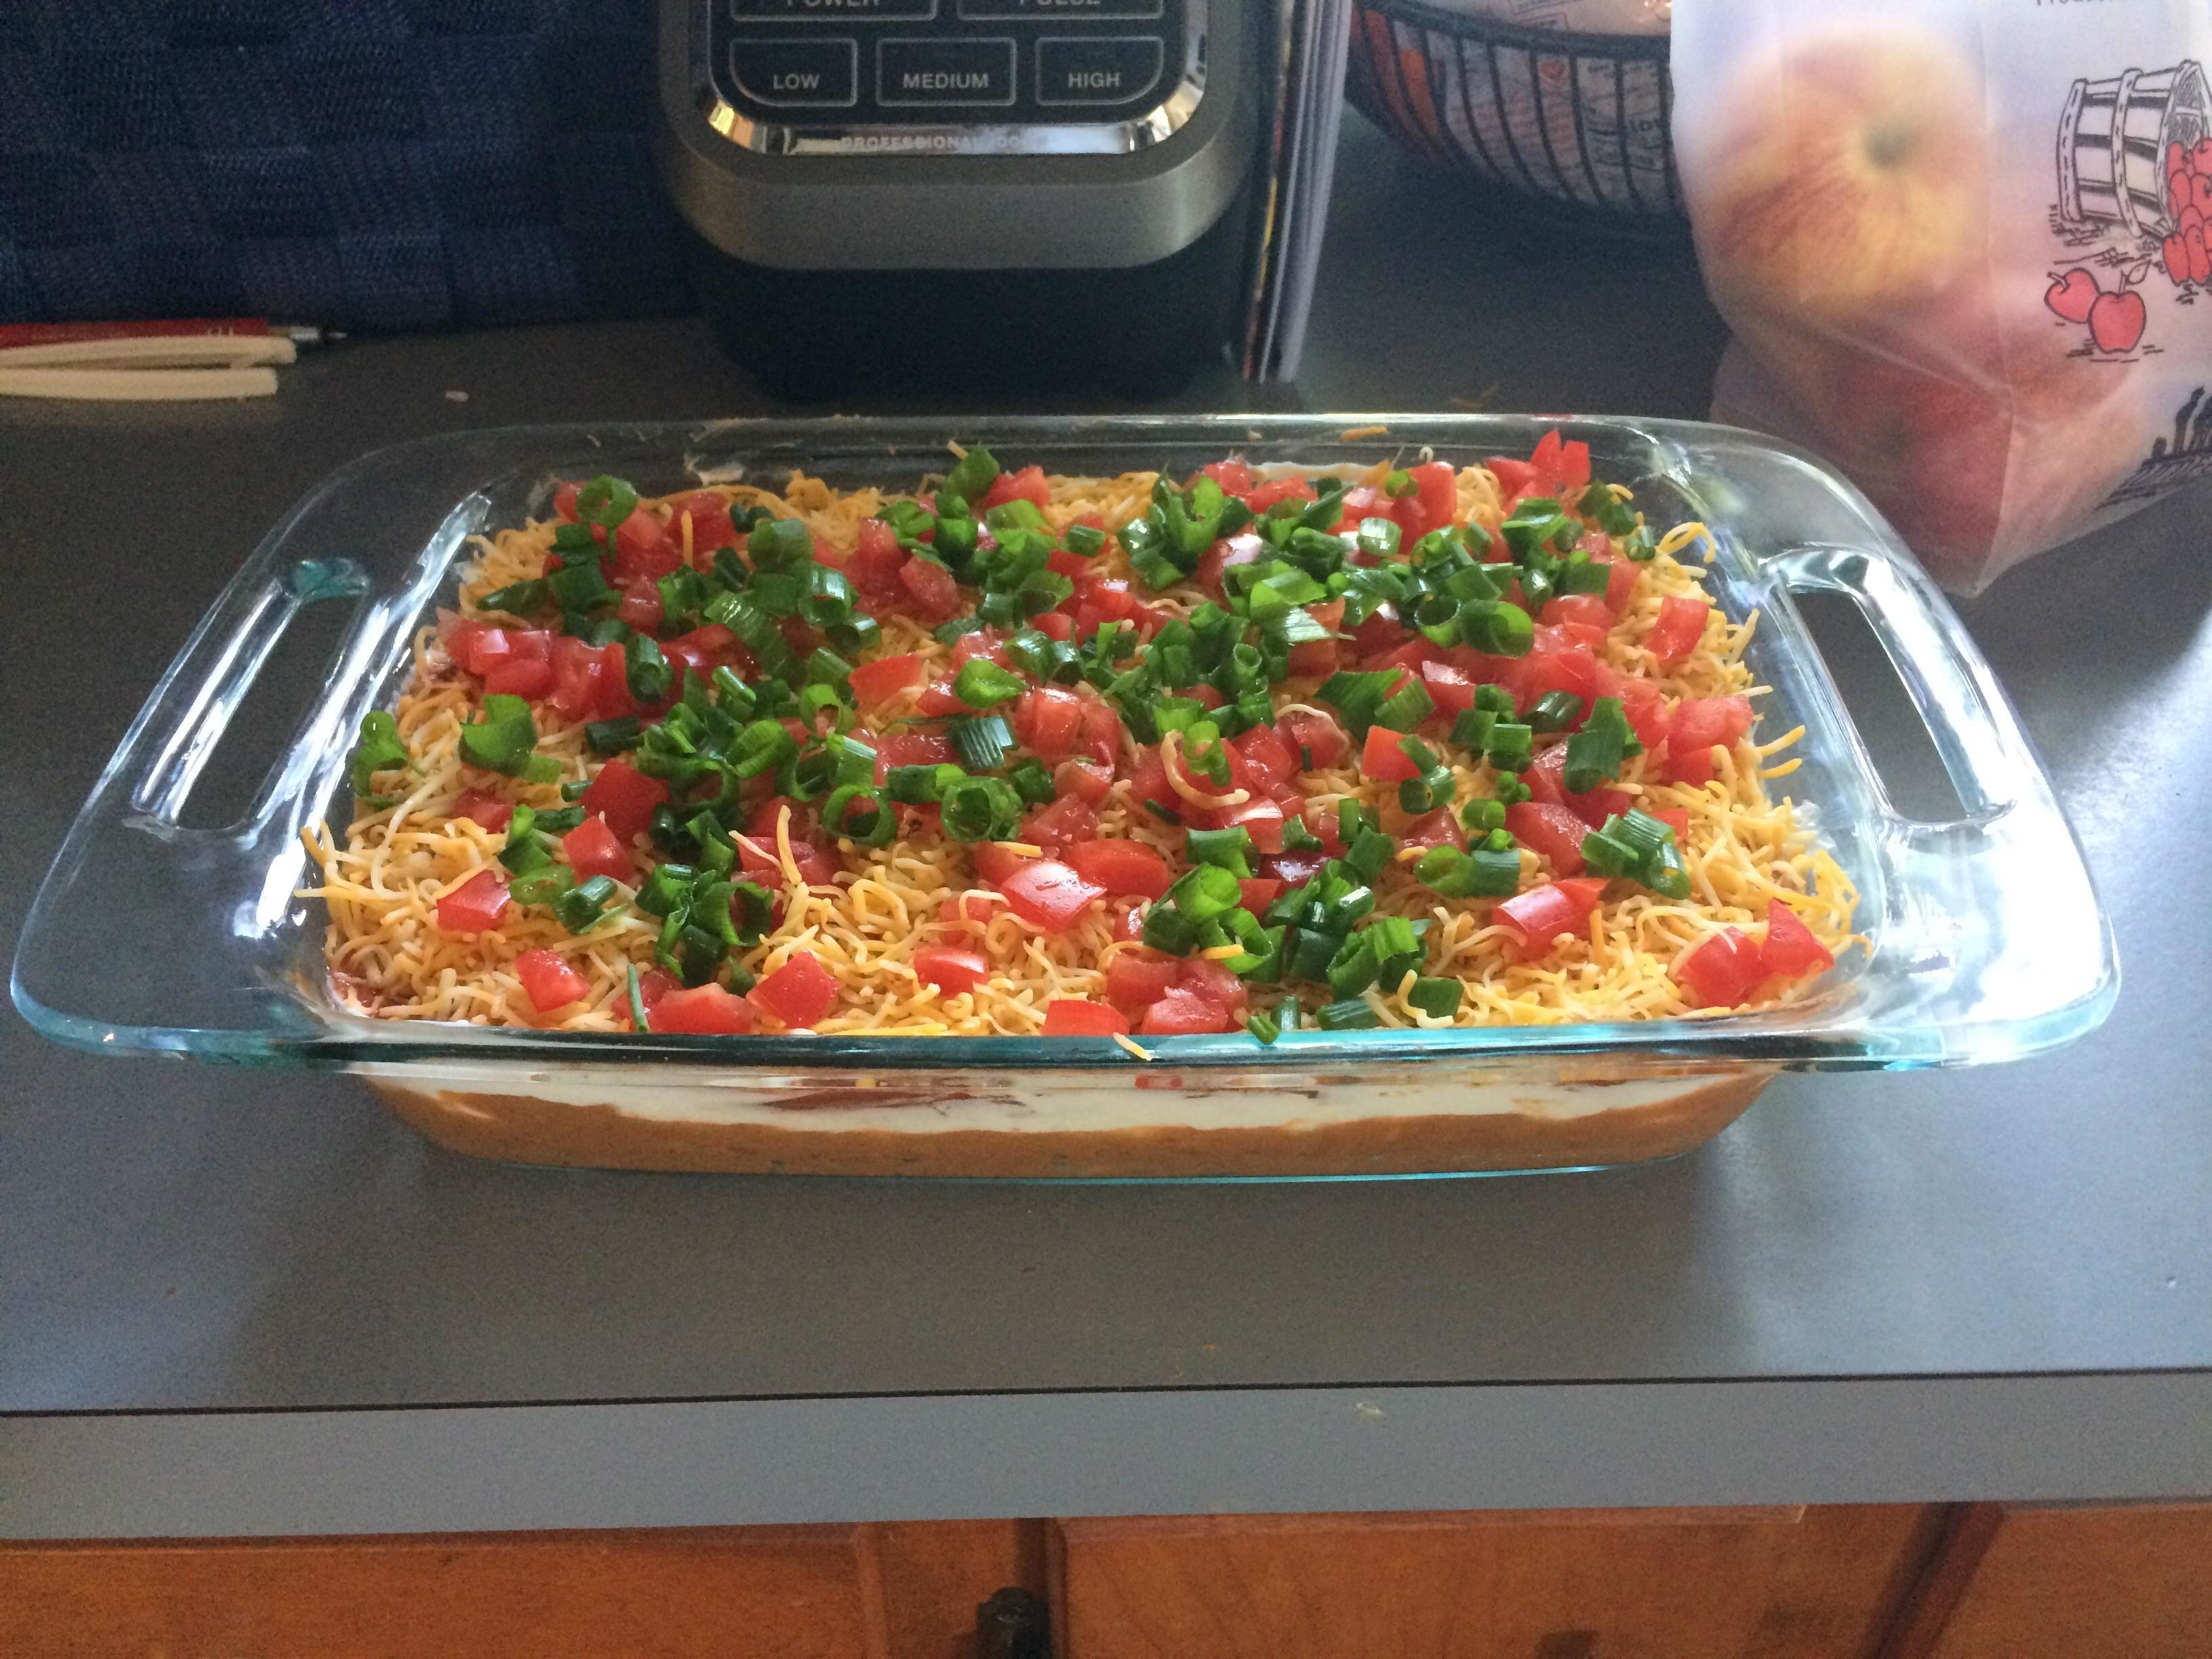 A glass baking dish filled with a layered taco dip topped with cheese, tomatoes, and green onions, on a kitchen counter